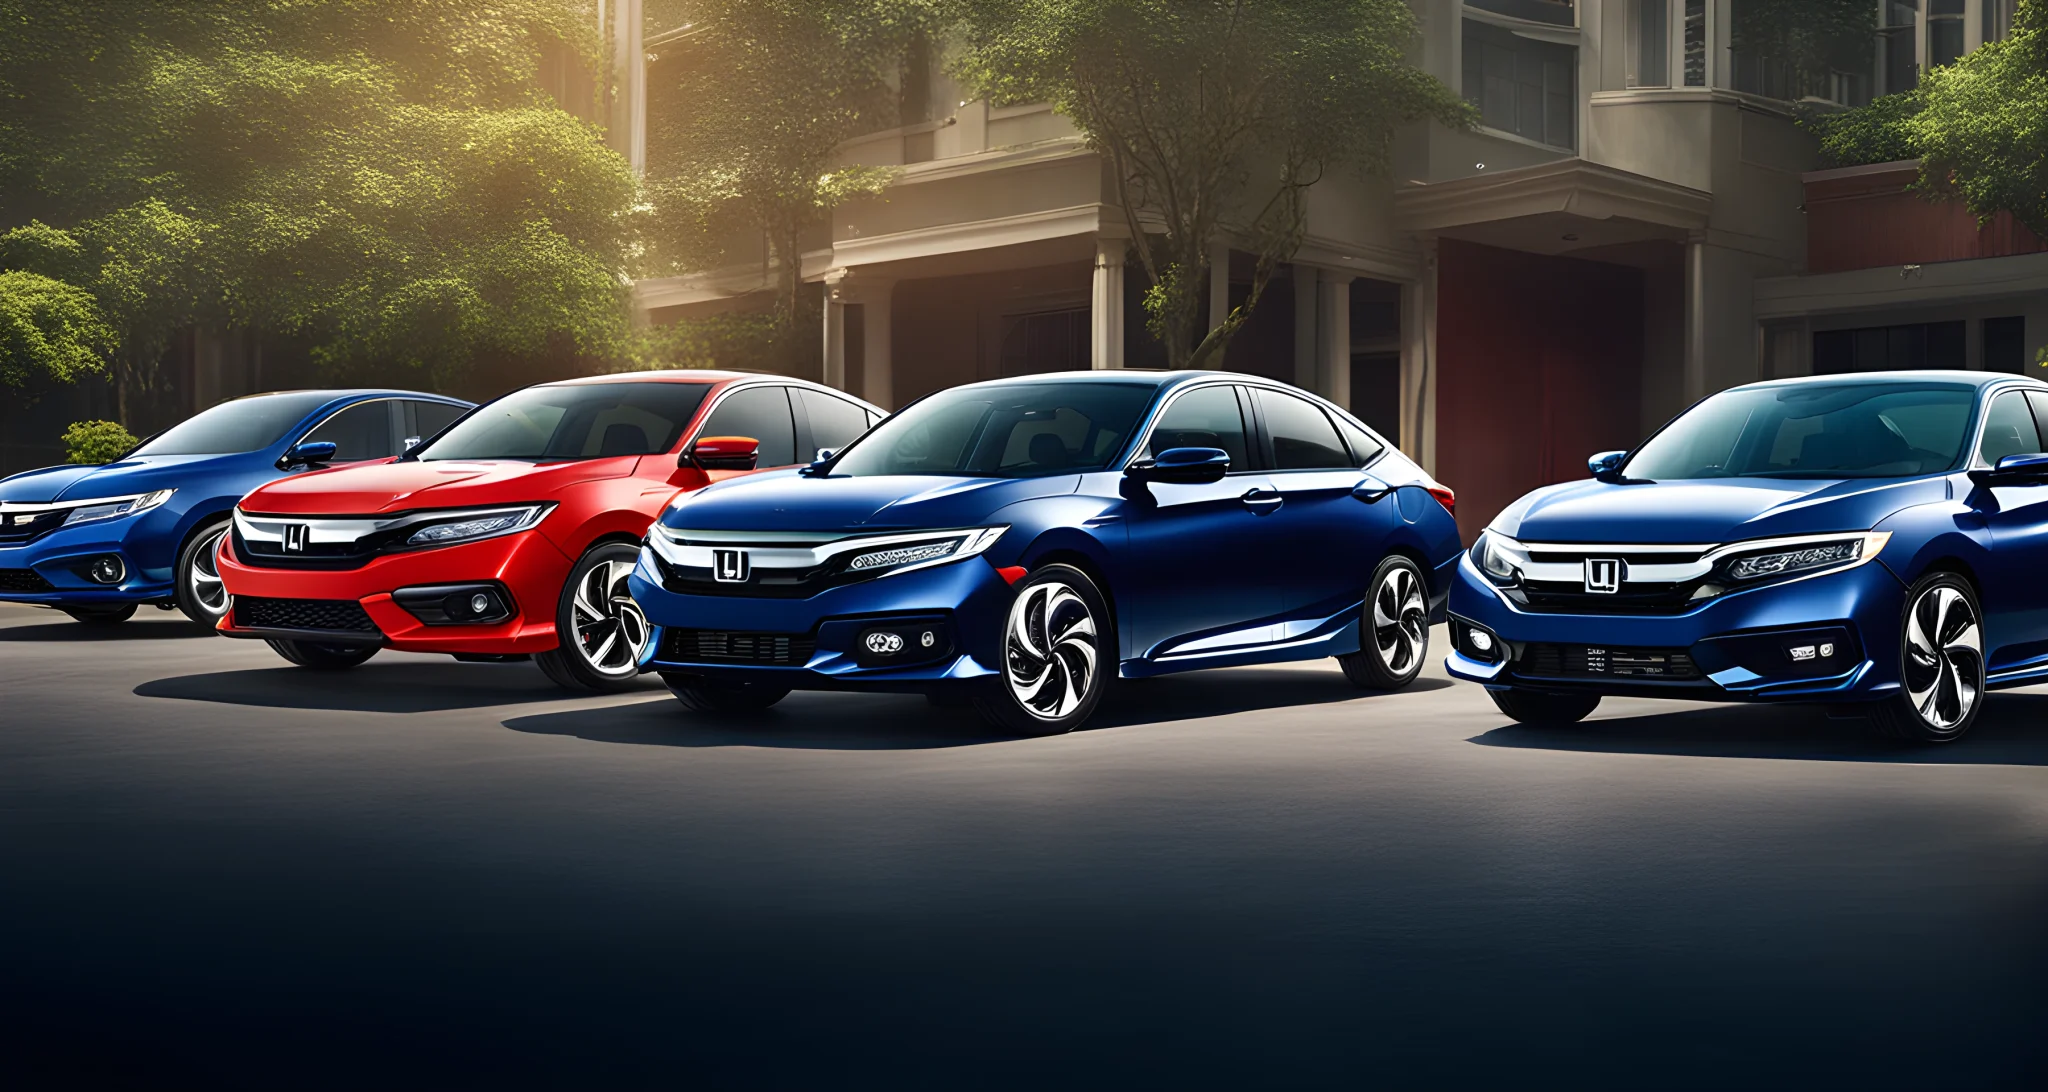 The image shows a variety of Honda car models lined up, showcasing different features and trim levels.